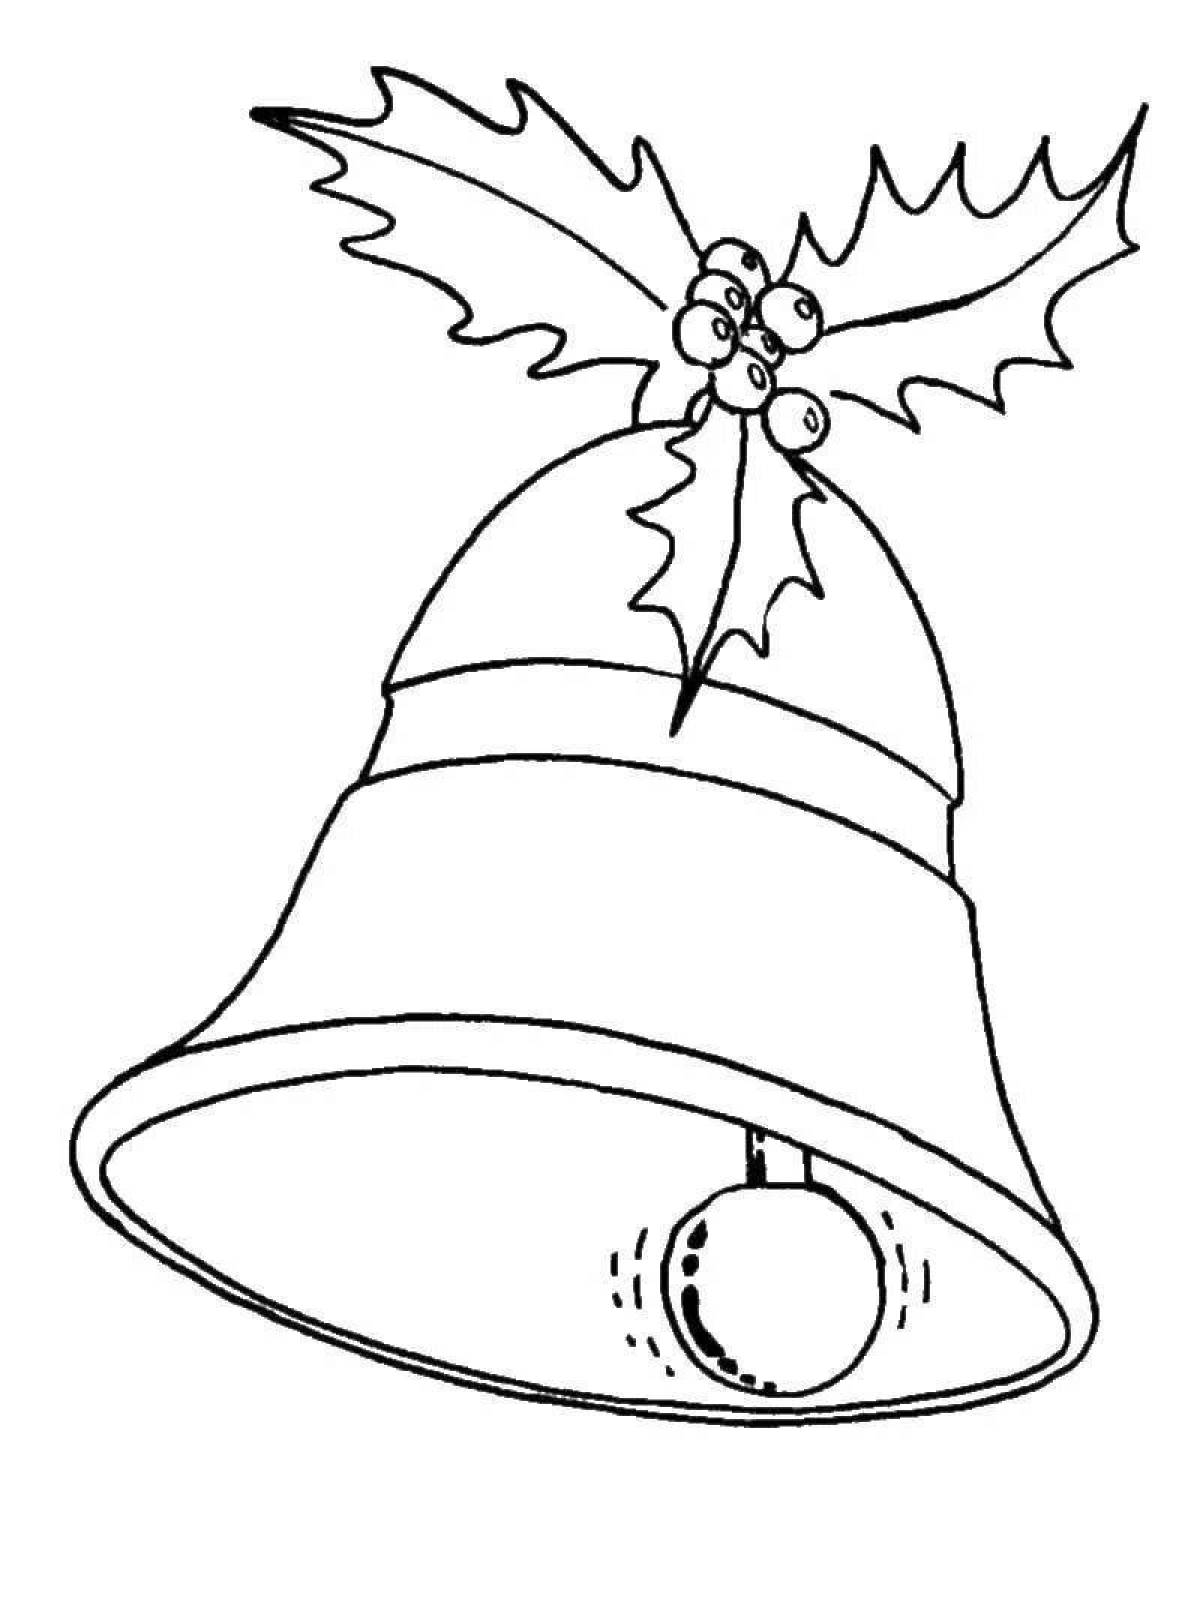 Exciting call coloring page